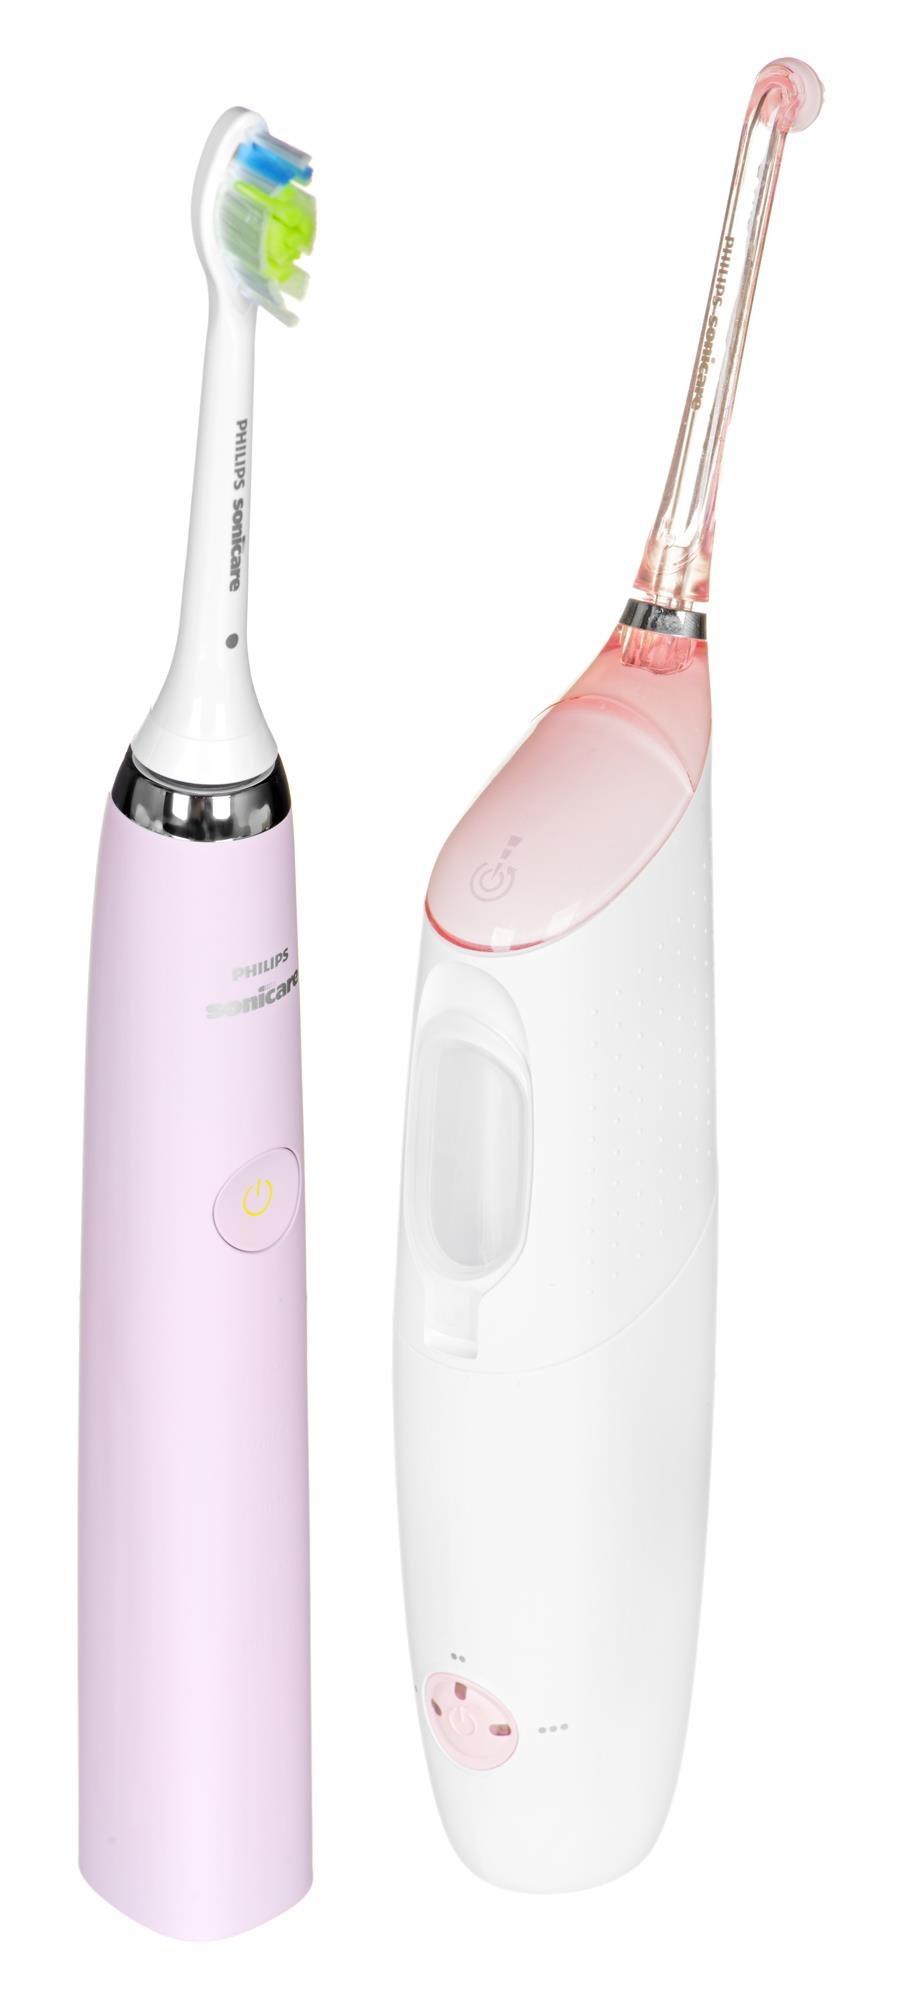 Smile scene weekend Philips Sonicare Airfloss Pro/Ultra HX8391/02 | Health and beauty |  Appliances | Online shop BM.lv